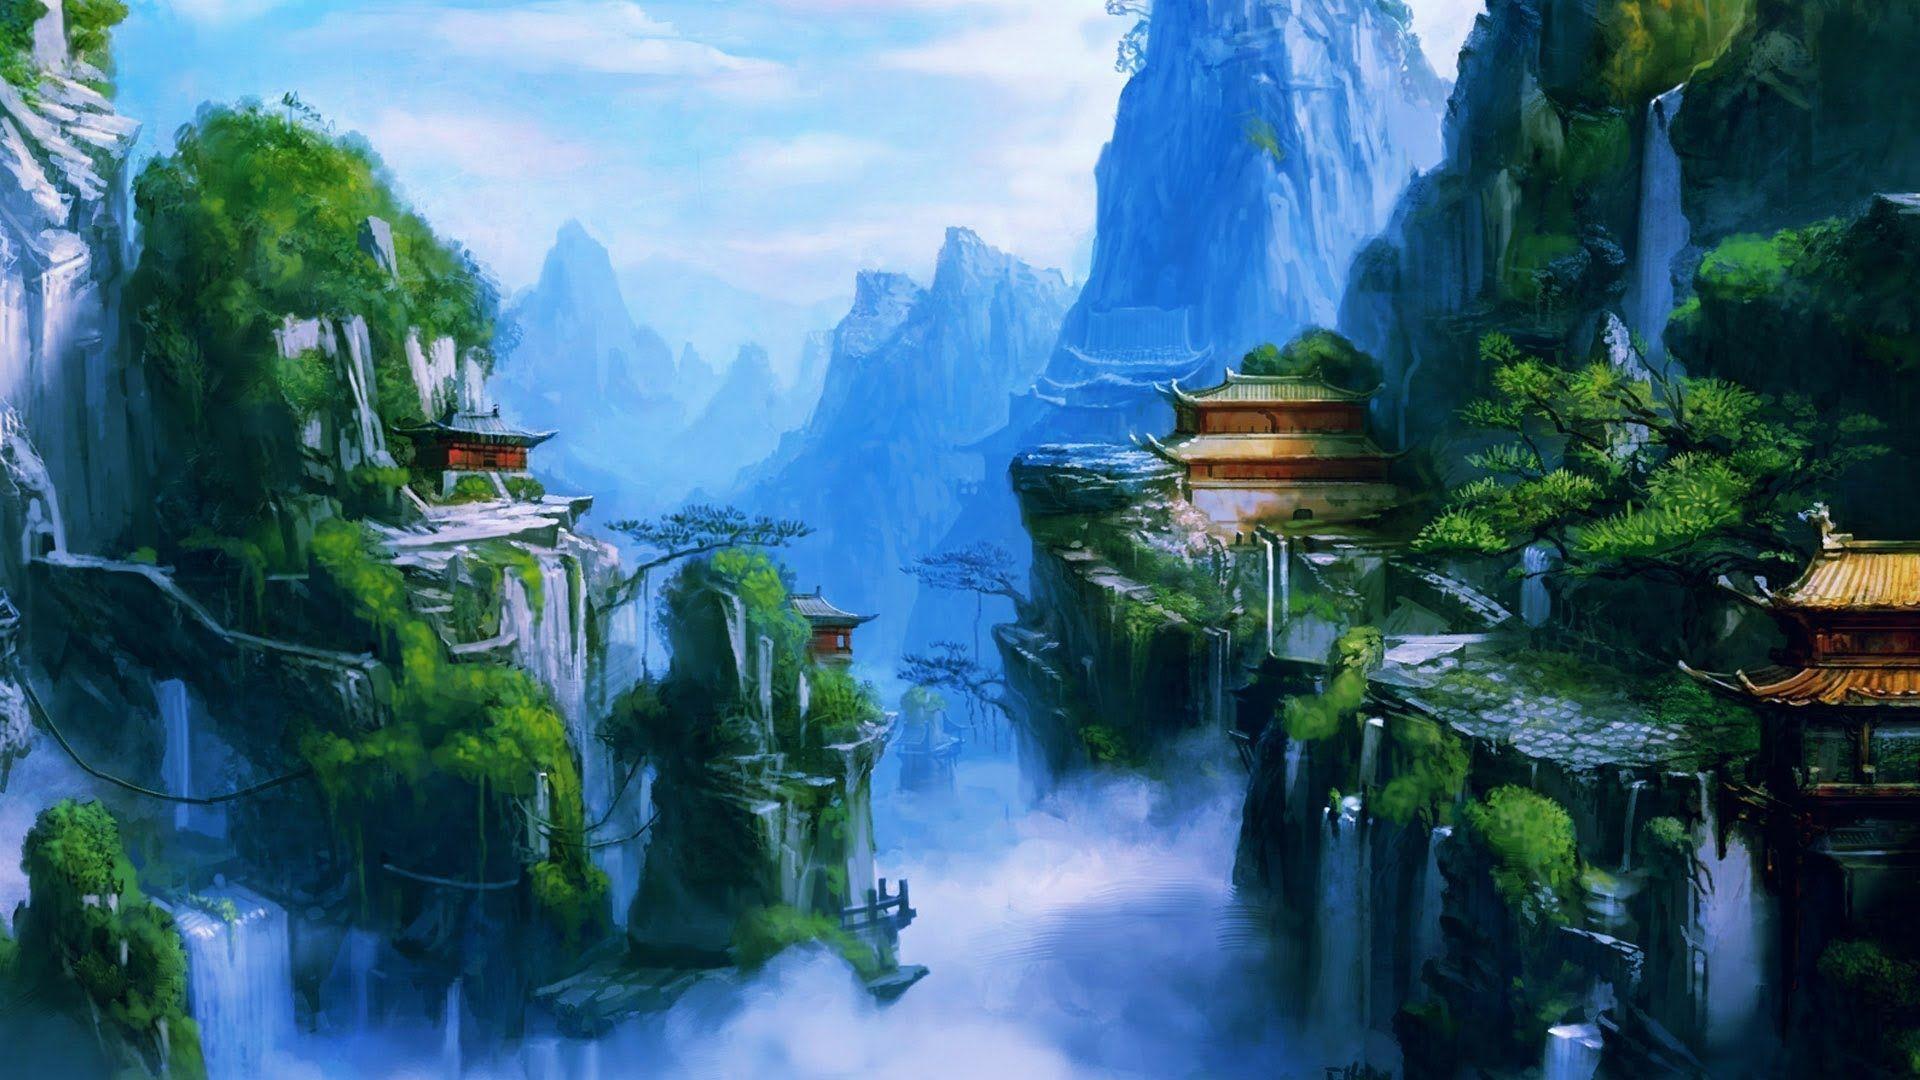 Chinese Nature Wallpapers Wallpaper Cave, Beautiful Chinese Landscape Wallpapers For Iphone